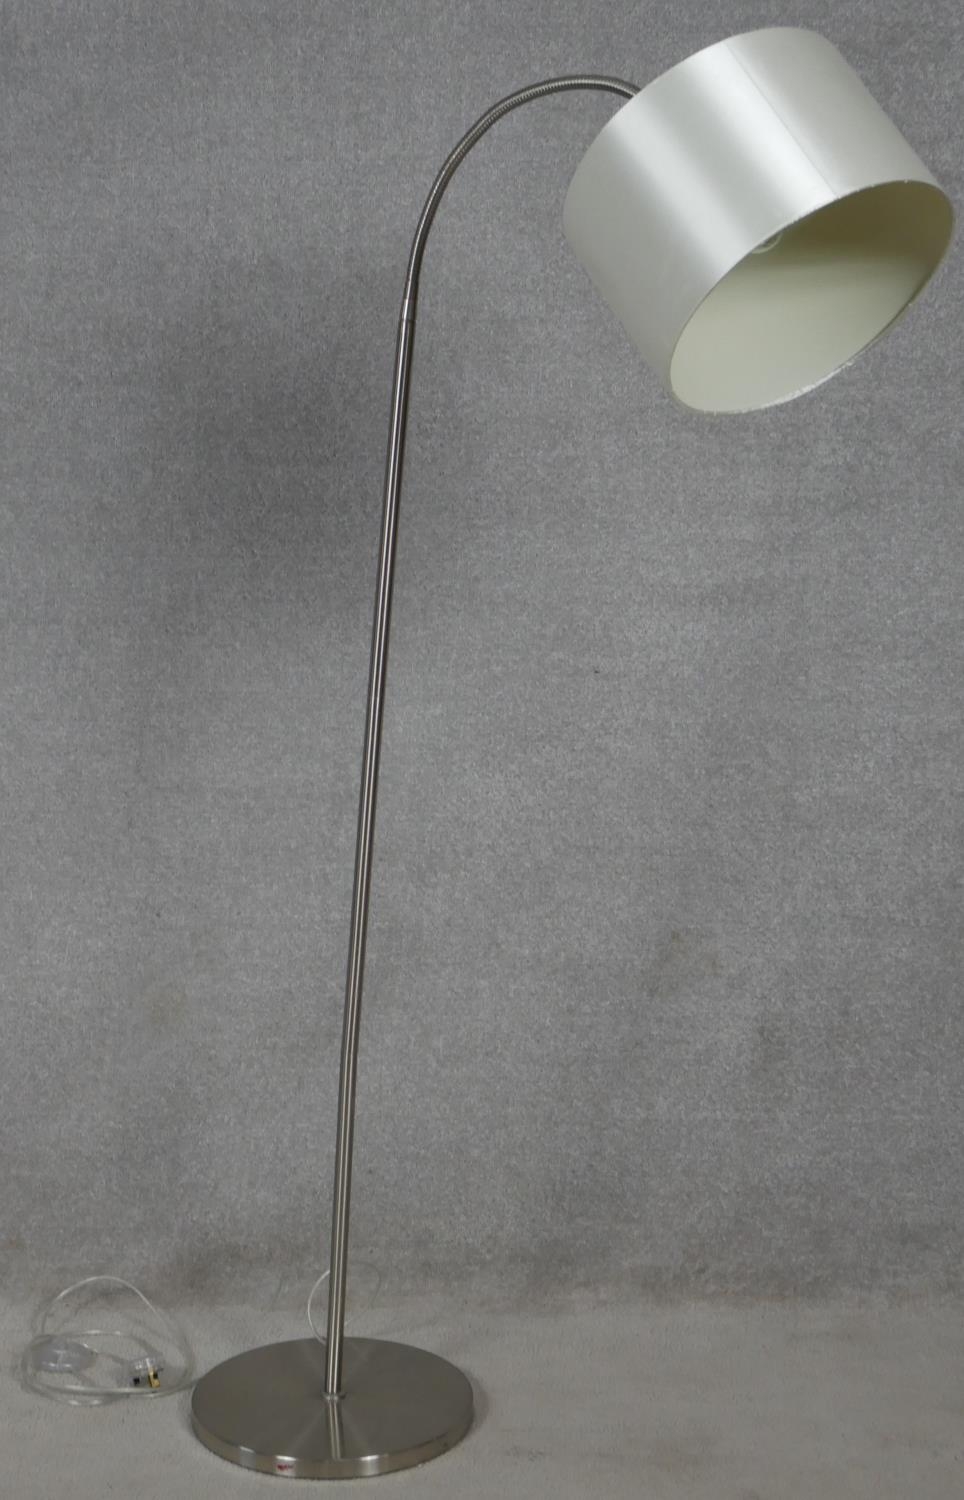 A contemporary standard lamp and shade with flexible adjustable column for use as a reading lamp.